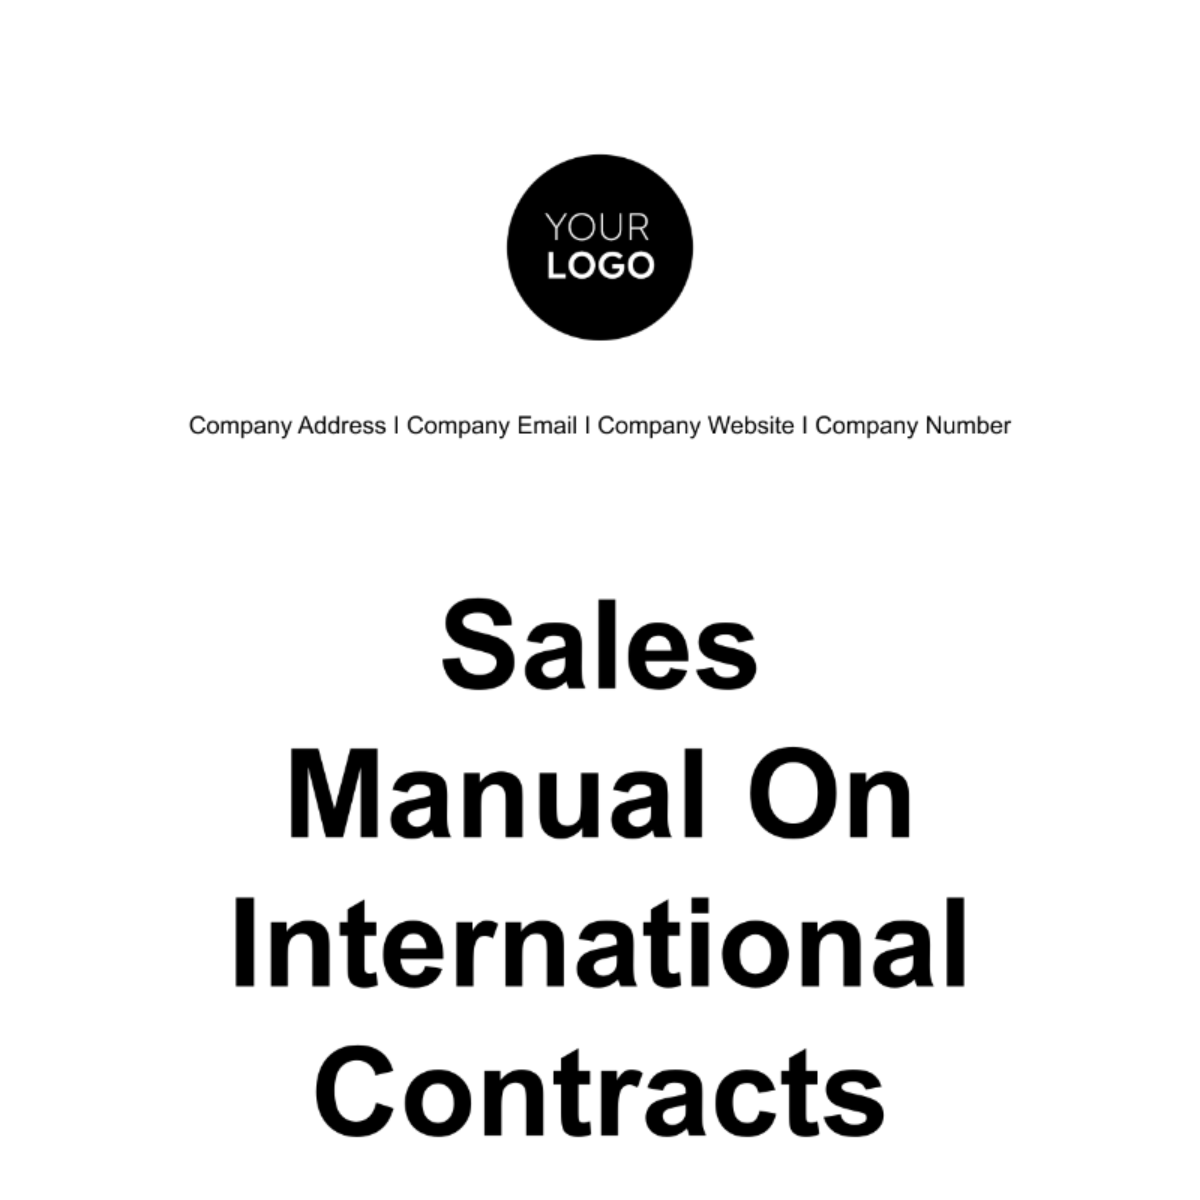 Free Sales Manual on International Contracts Template